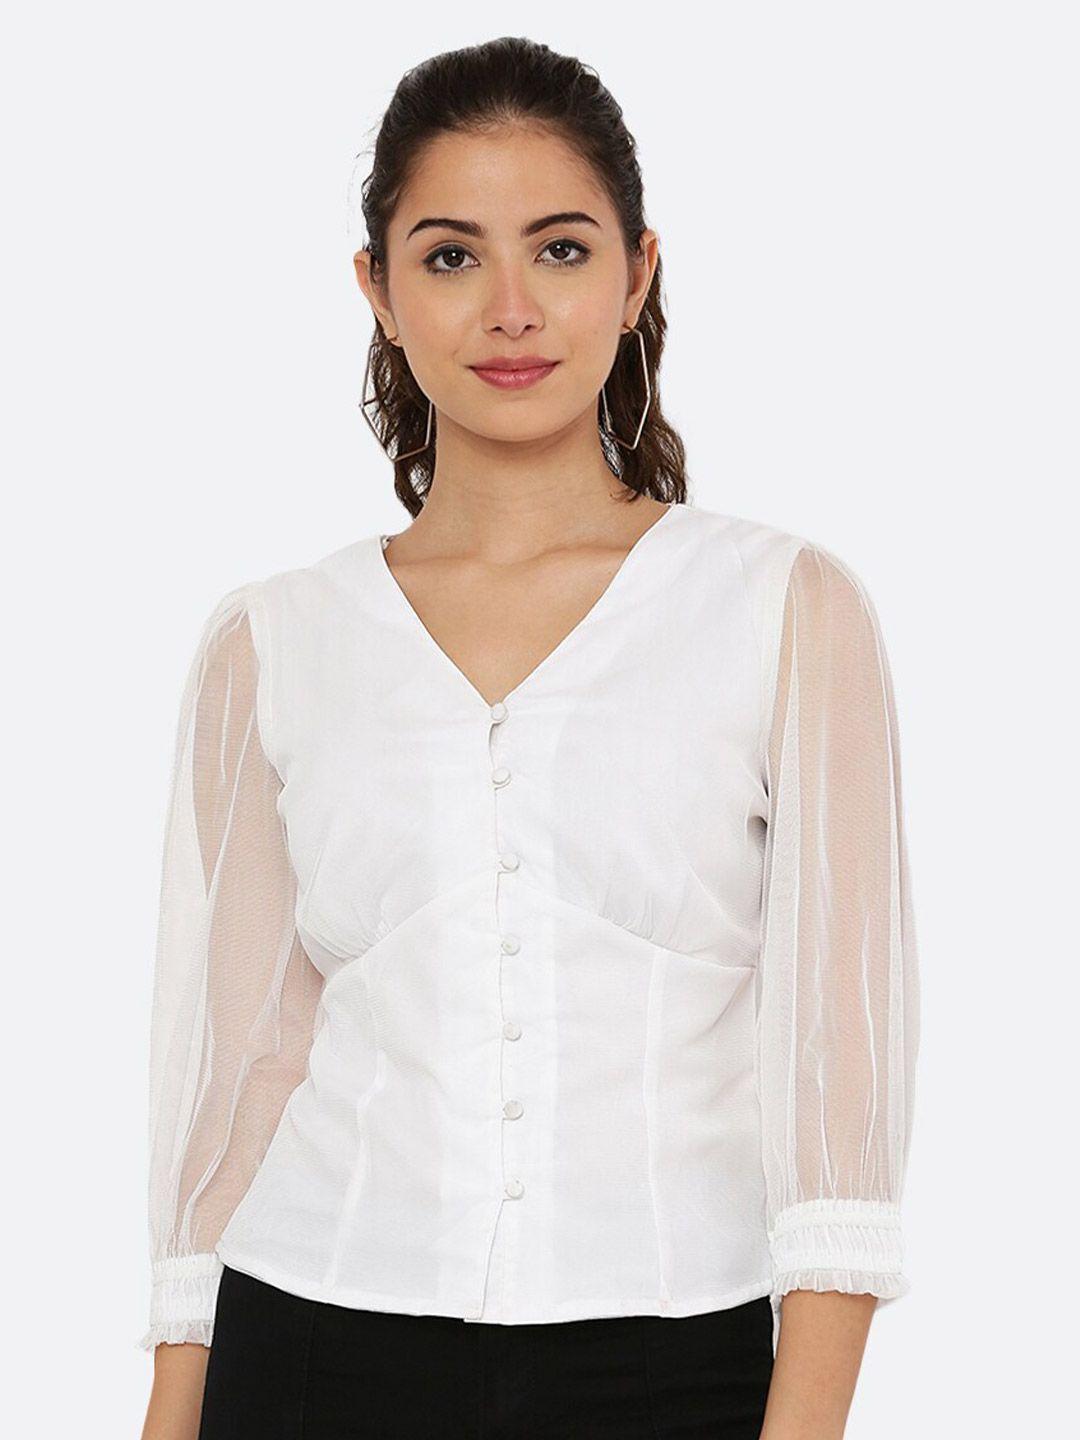 raassio women white top with net sleeves